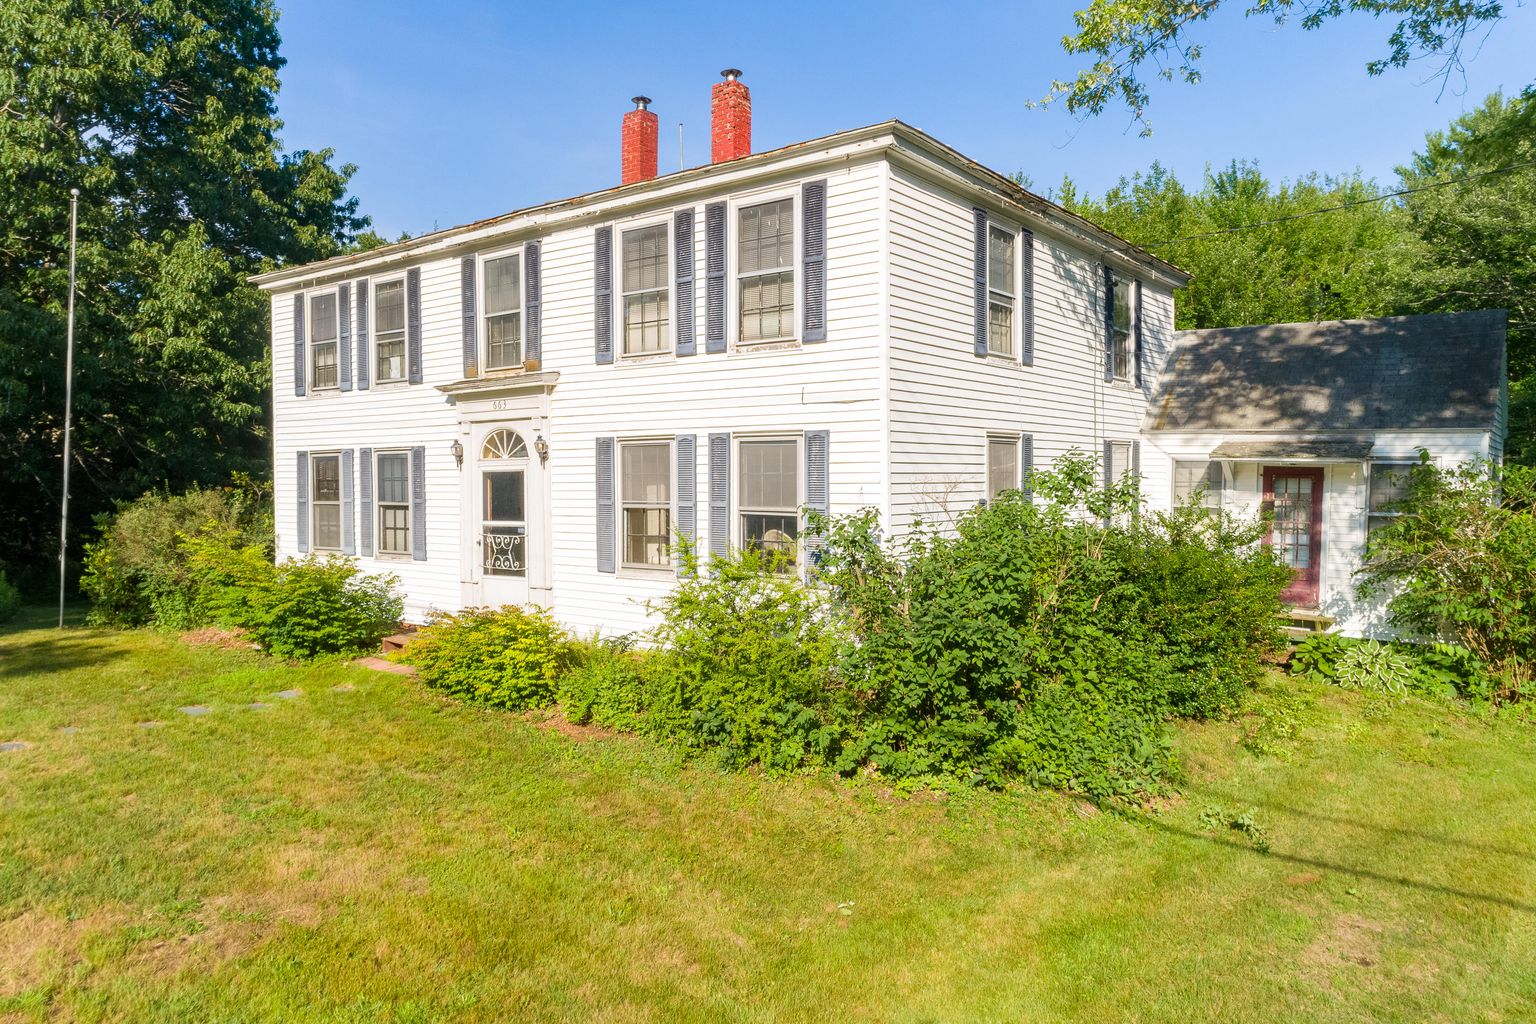 Topsham Maine historical old colonial home